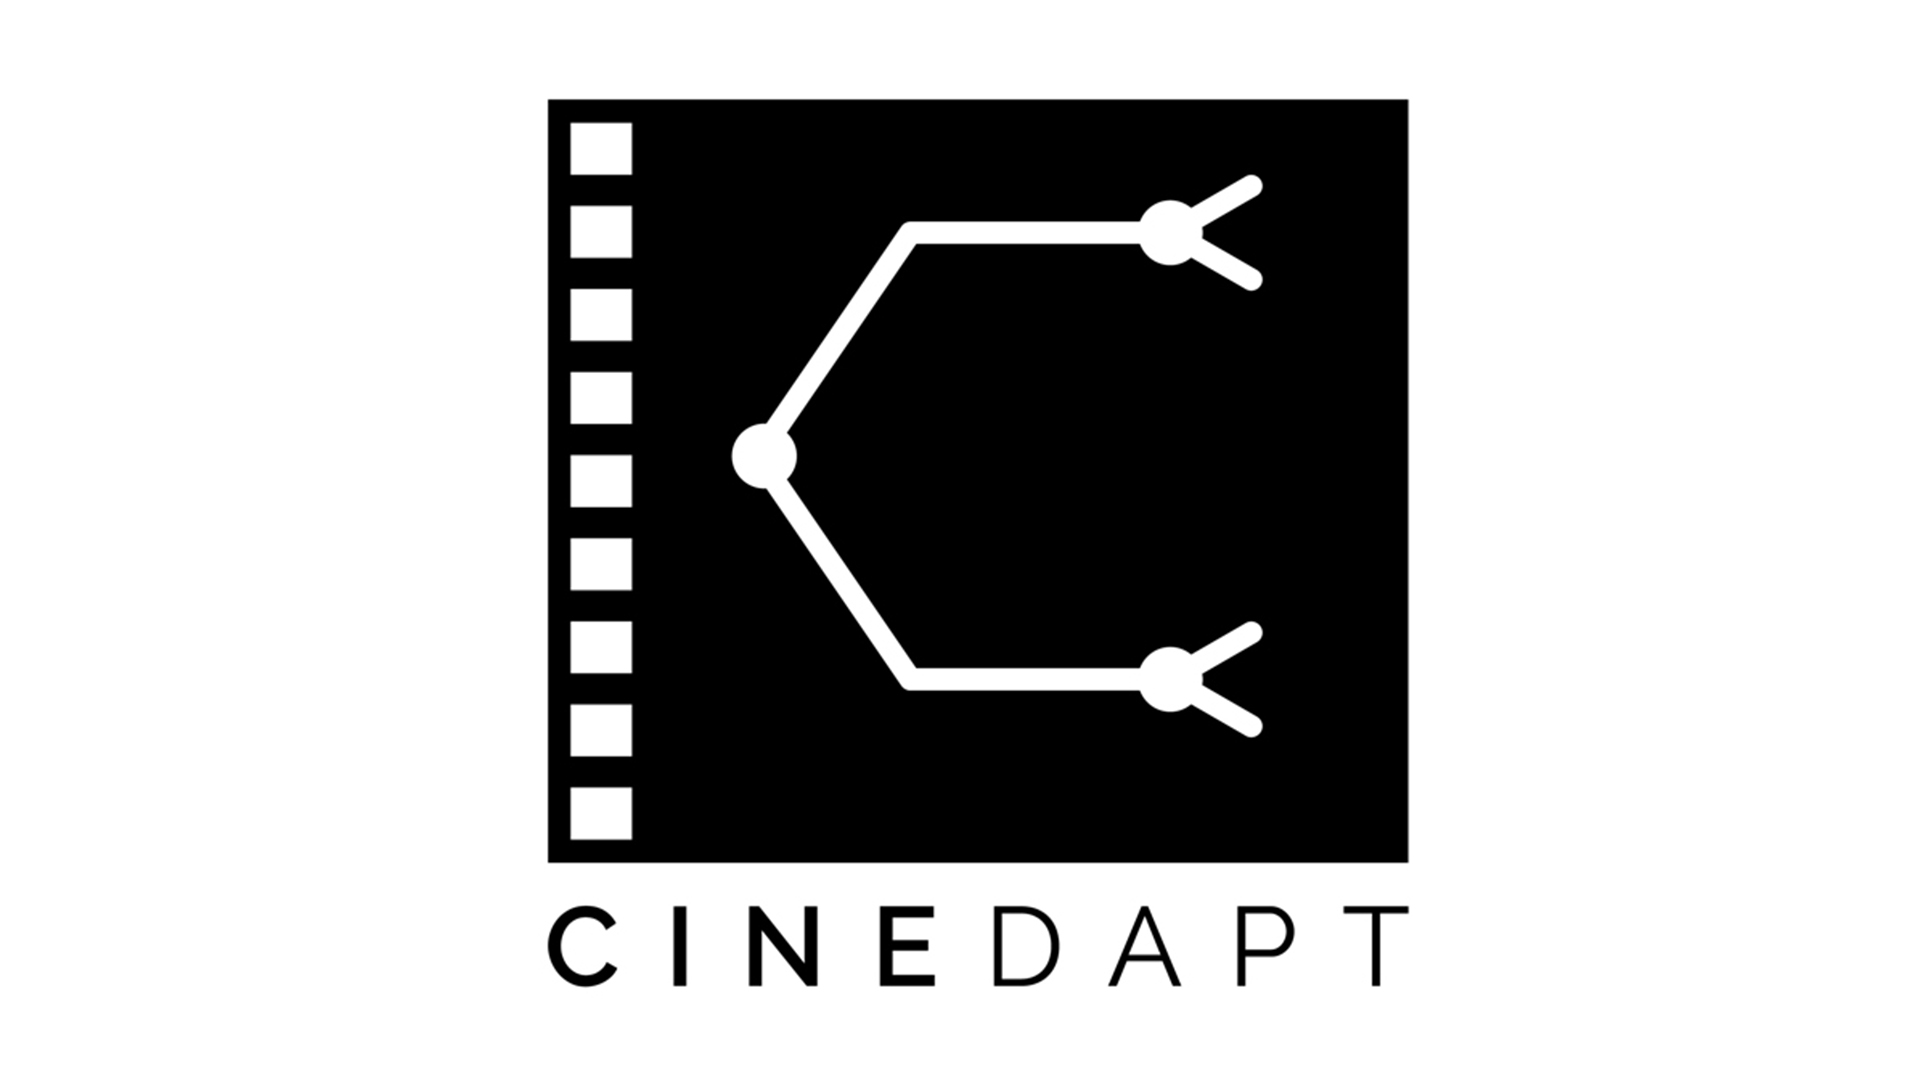 Cinedapt is Now Casting for a film that will revolutionize the film entertainment industry